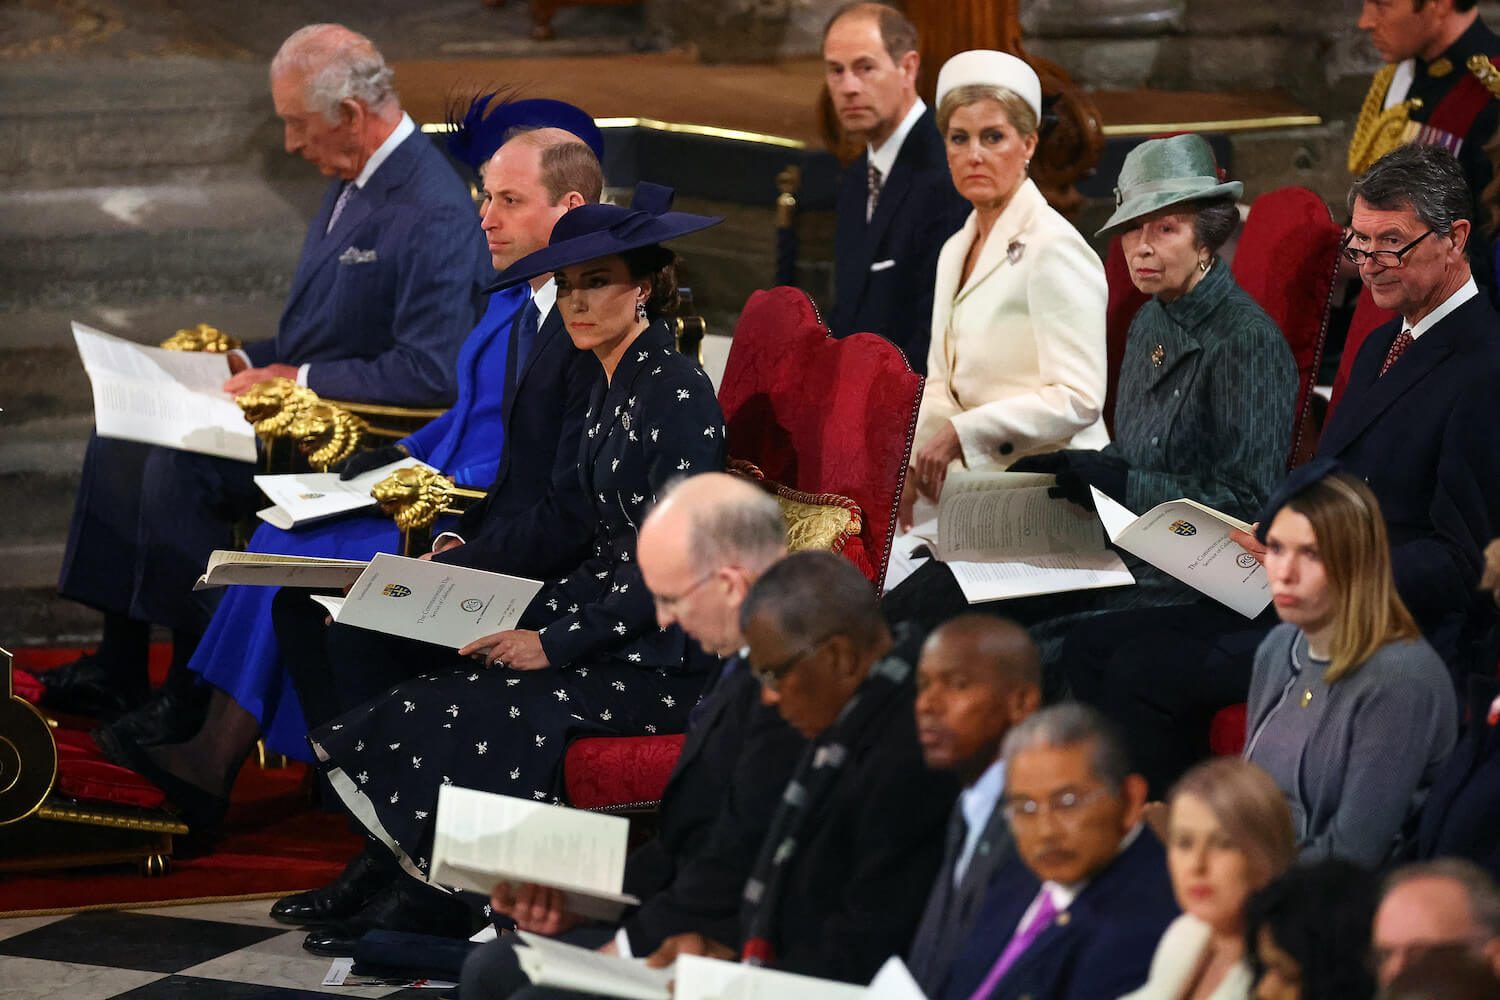 Kate Middleton looks serious during the Commonwealth Day Service